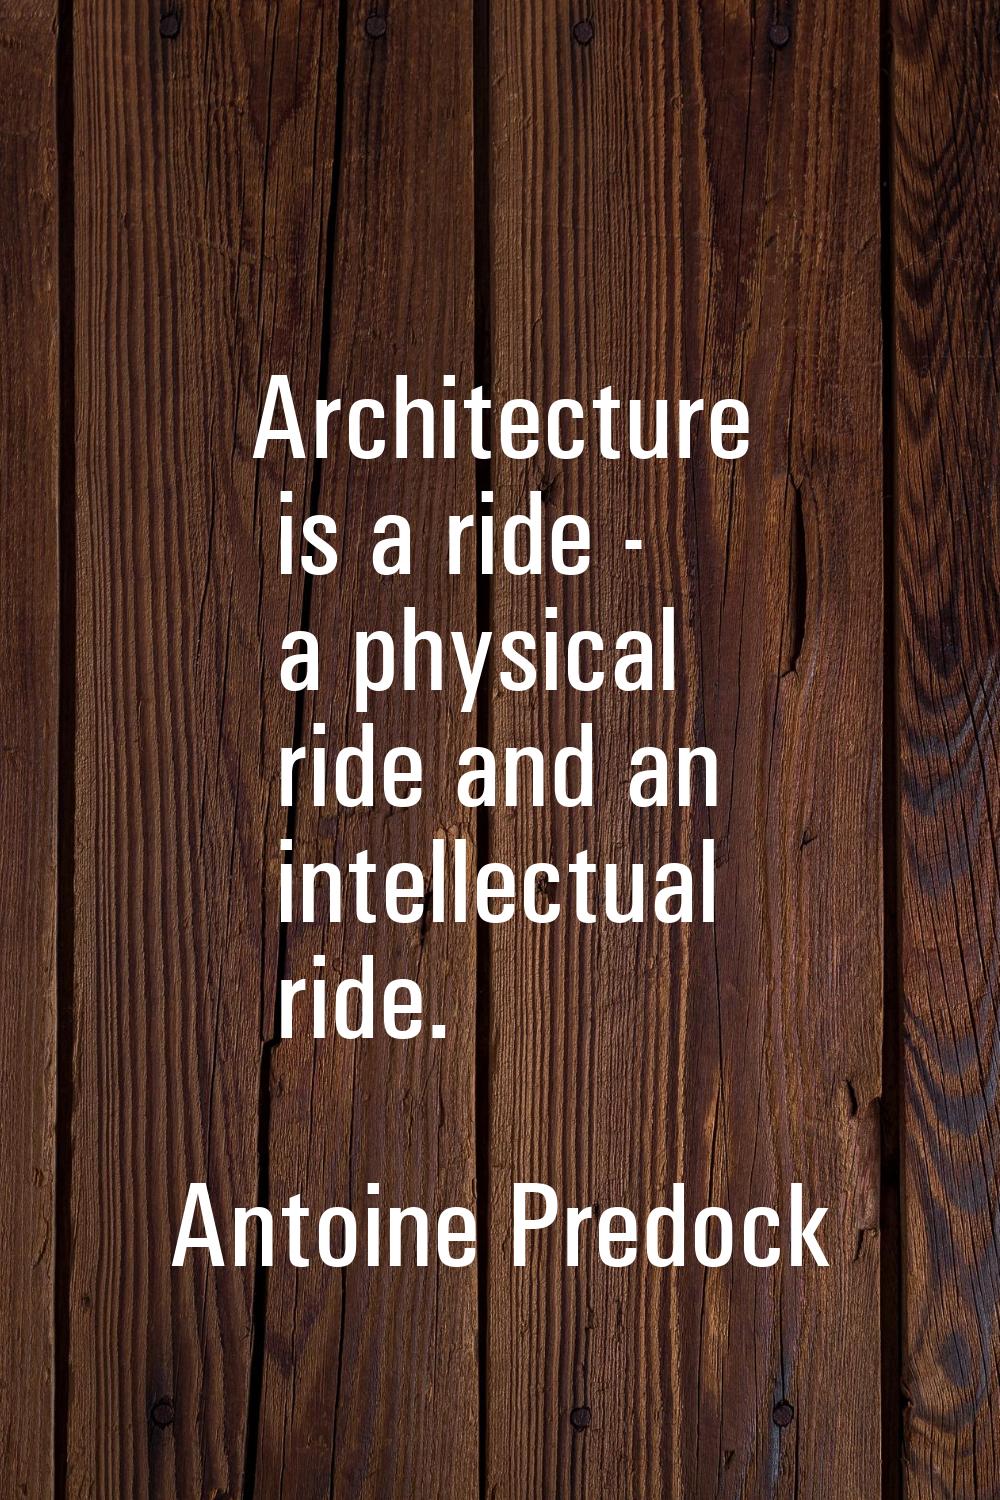 Architecture is a ride - a physical ride and an intellectual ride.